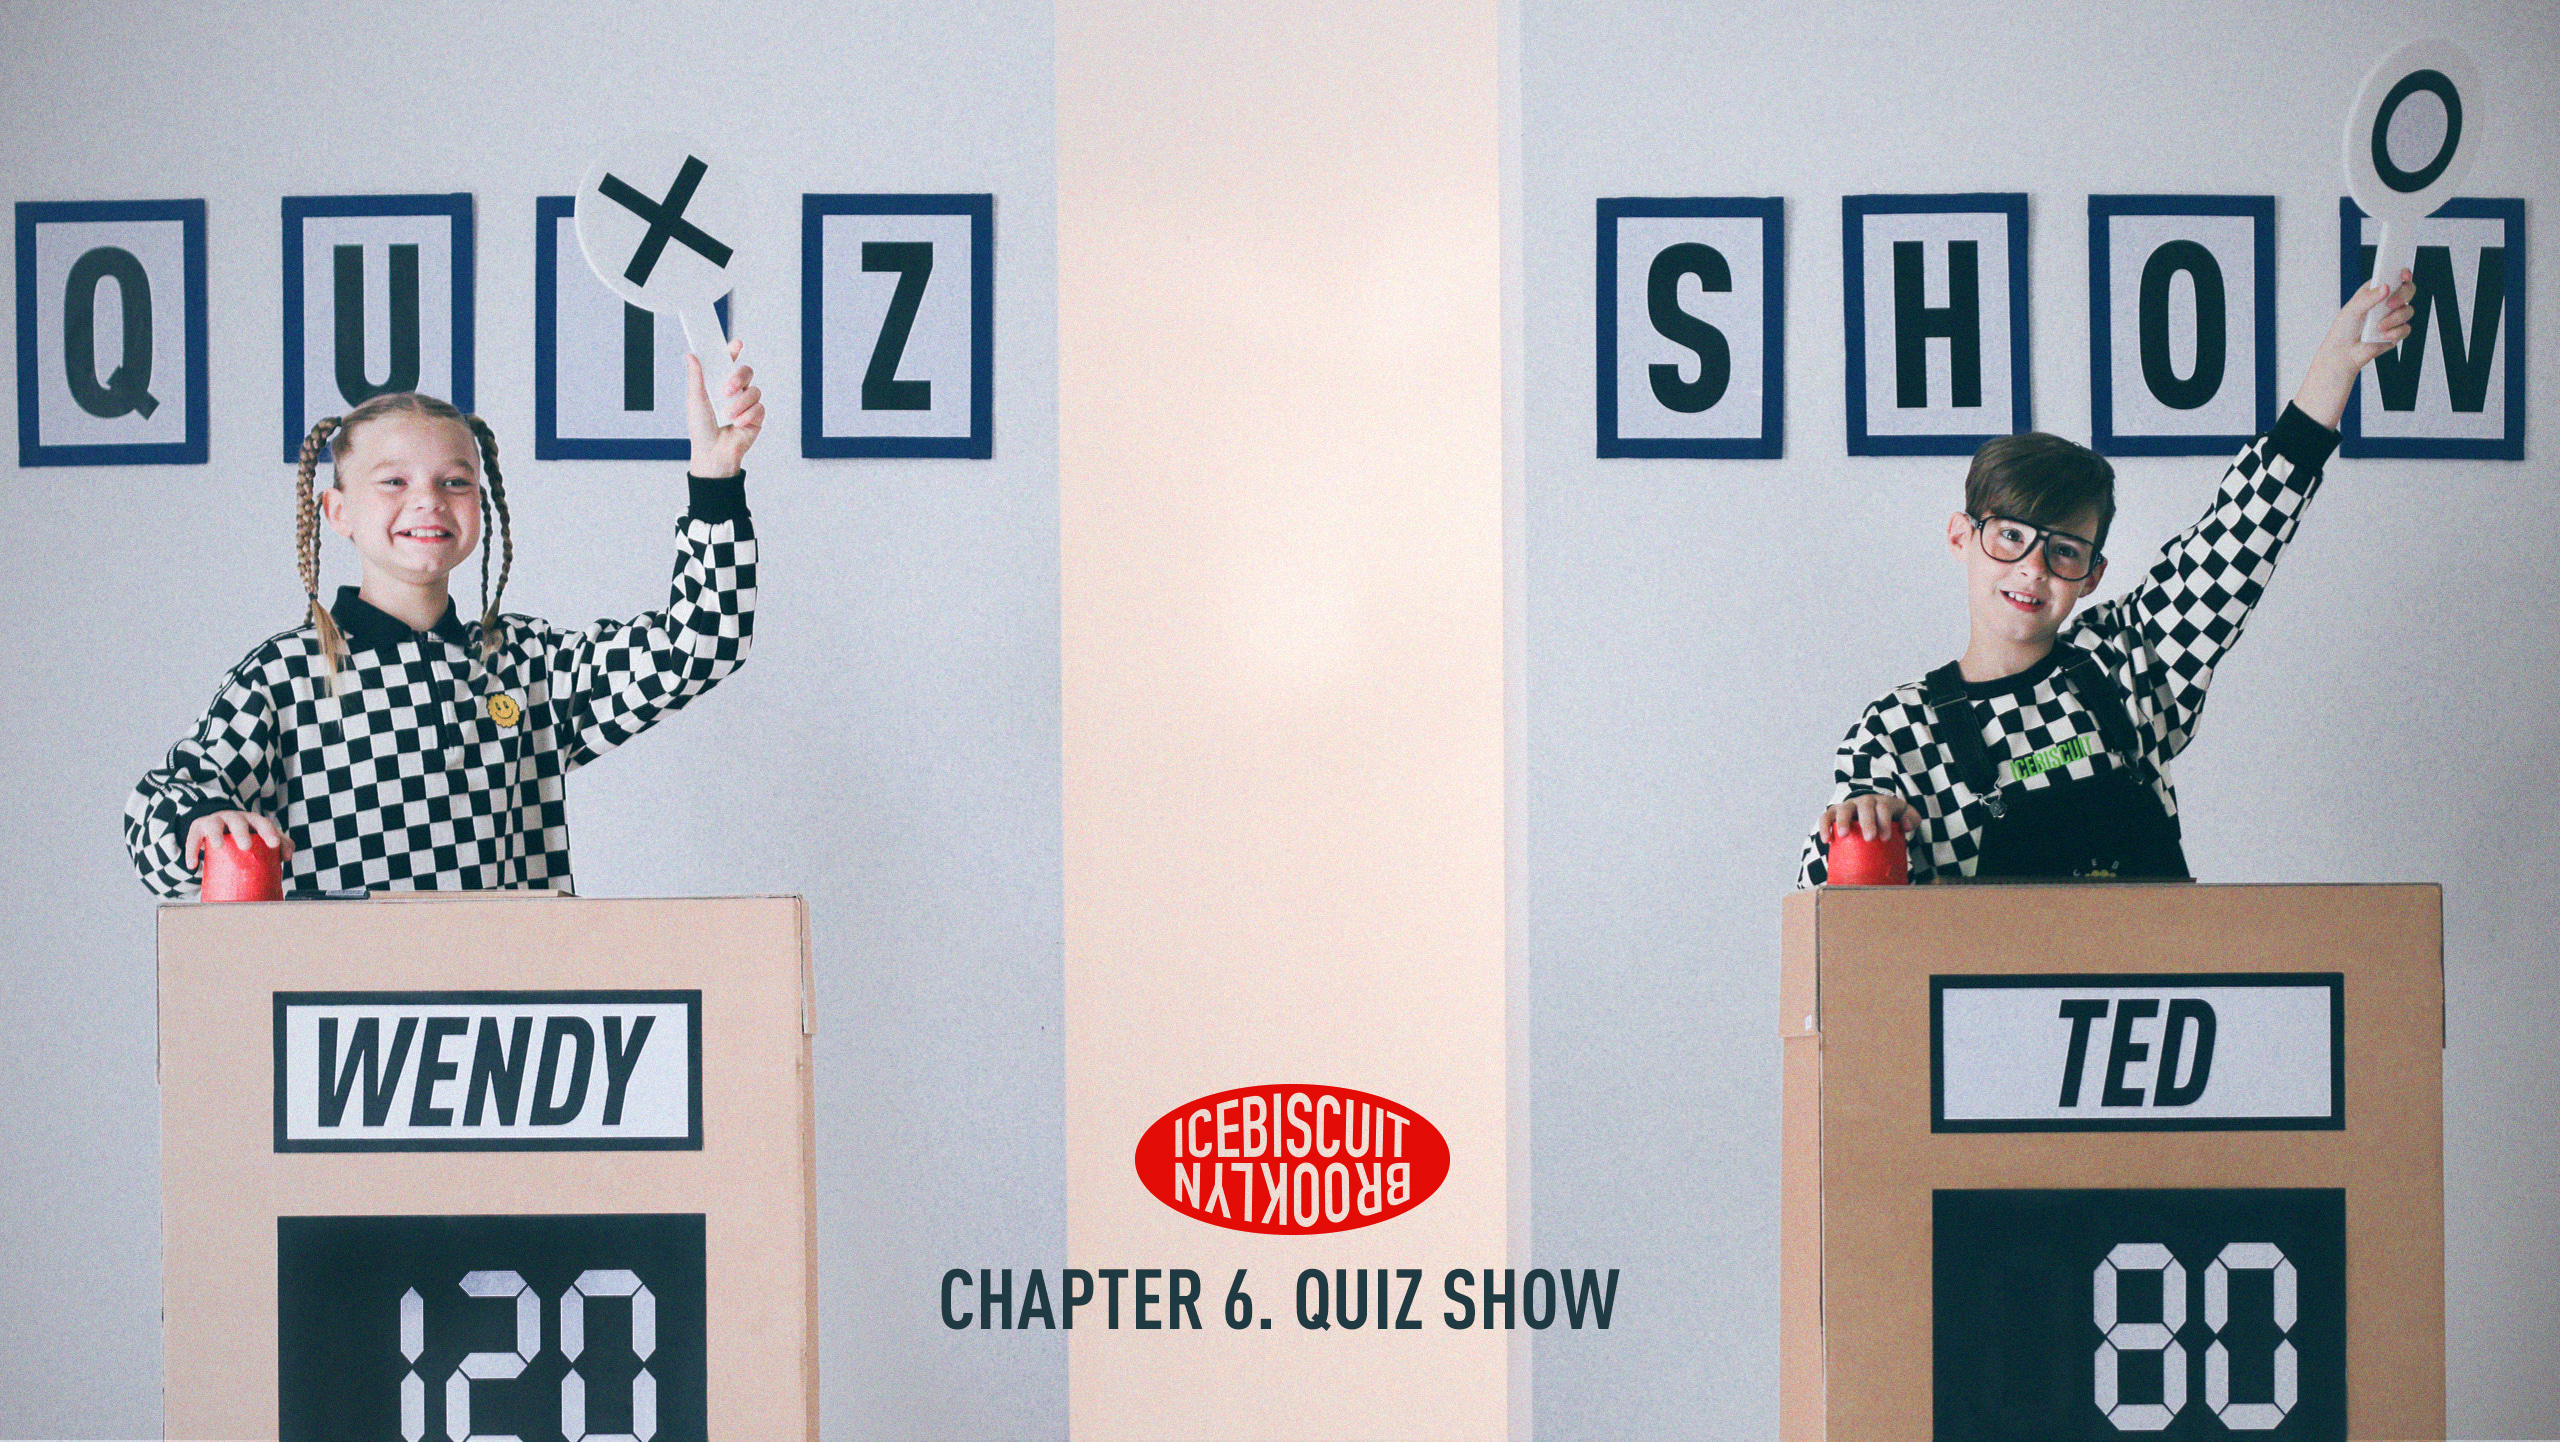 chapter 6. QUIZ SHOW